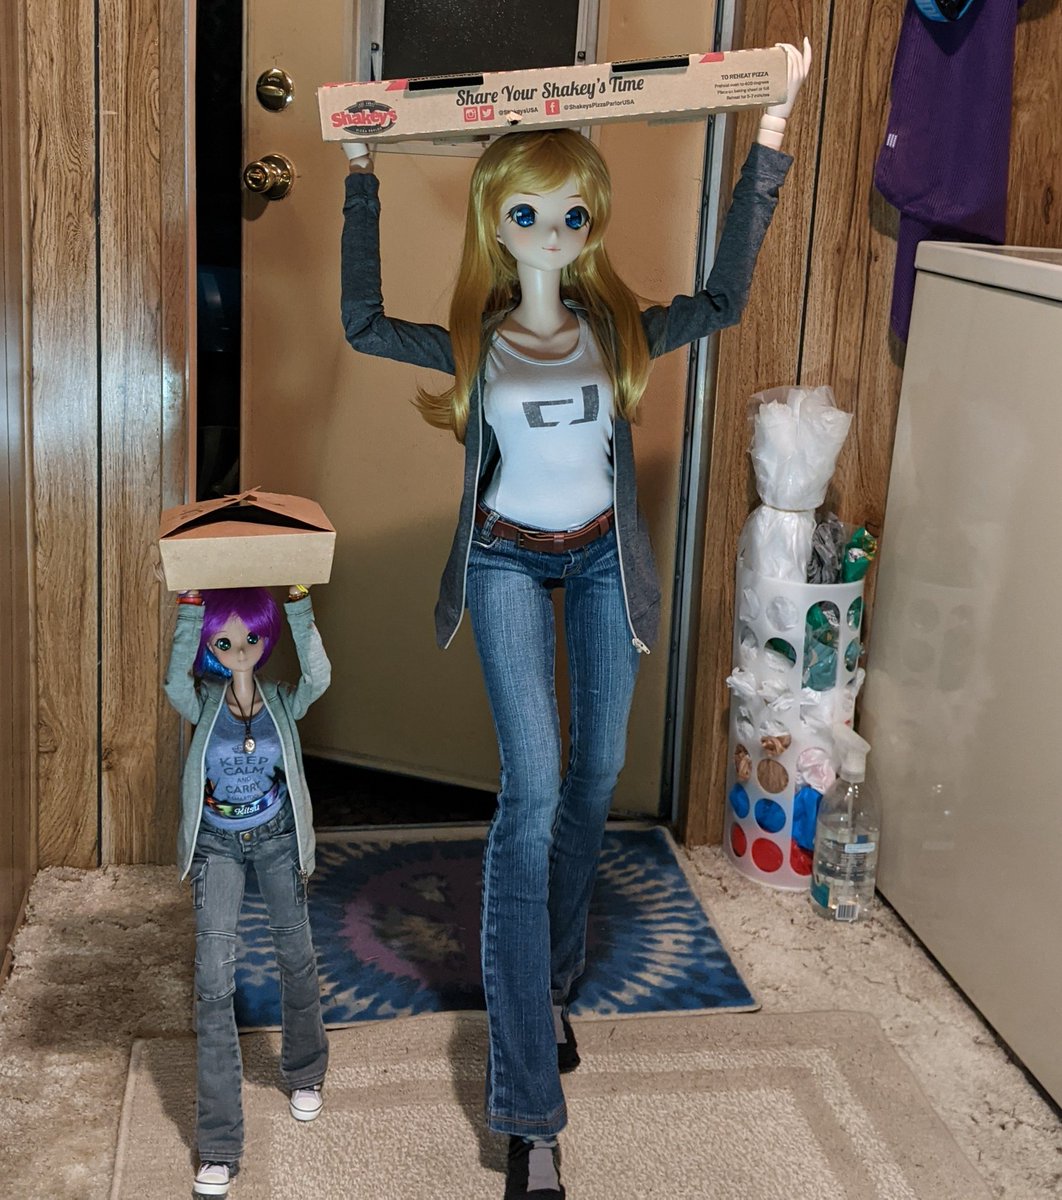 While I should've hid my car keys better.. They did redeem themselves! 'Oh Kitsu.. And Gliss!' 😅👍🍕 #Kitsu #Gliss #SmartDoll #BJD #SmDplus #Glissando #mannequin #actionfigure #cunningplan #mischief #roadtrip #PizzaRun #mojos #ShakeysPizza #PizzaNight #cabinfever